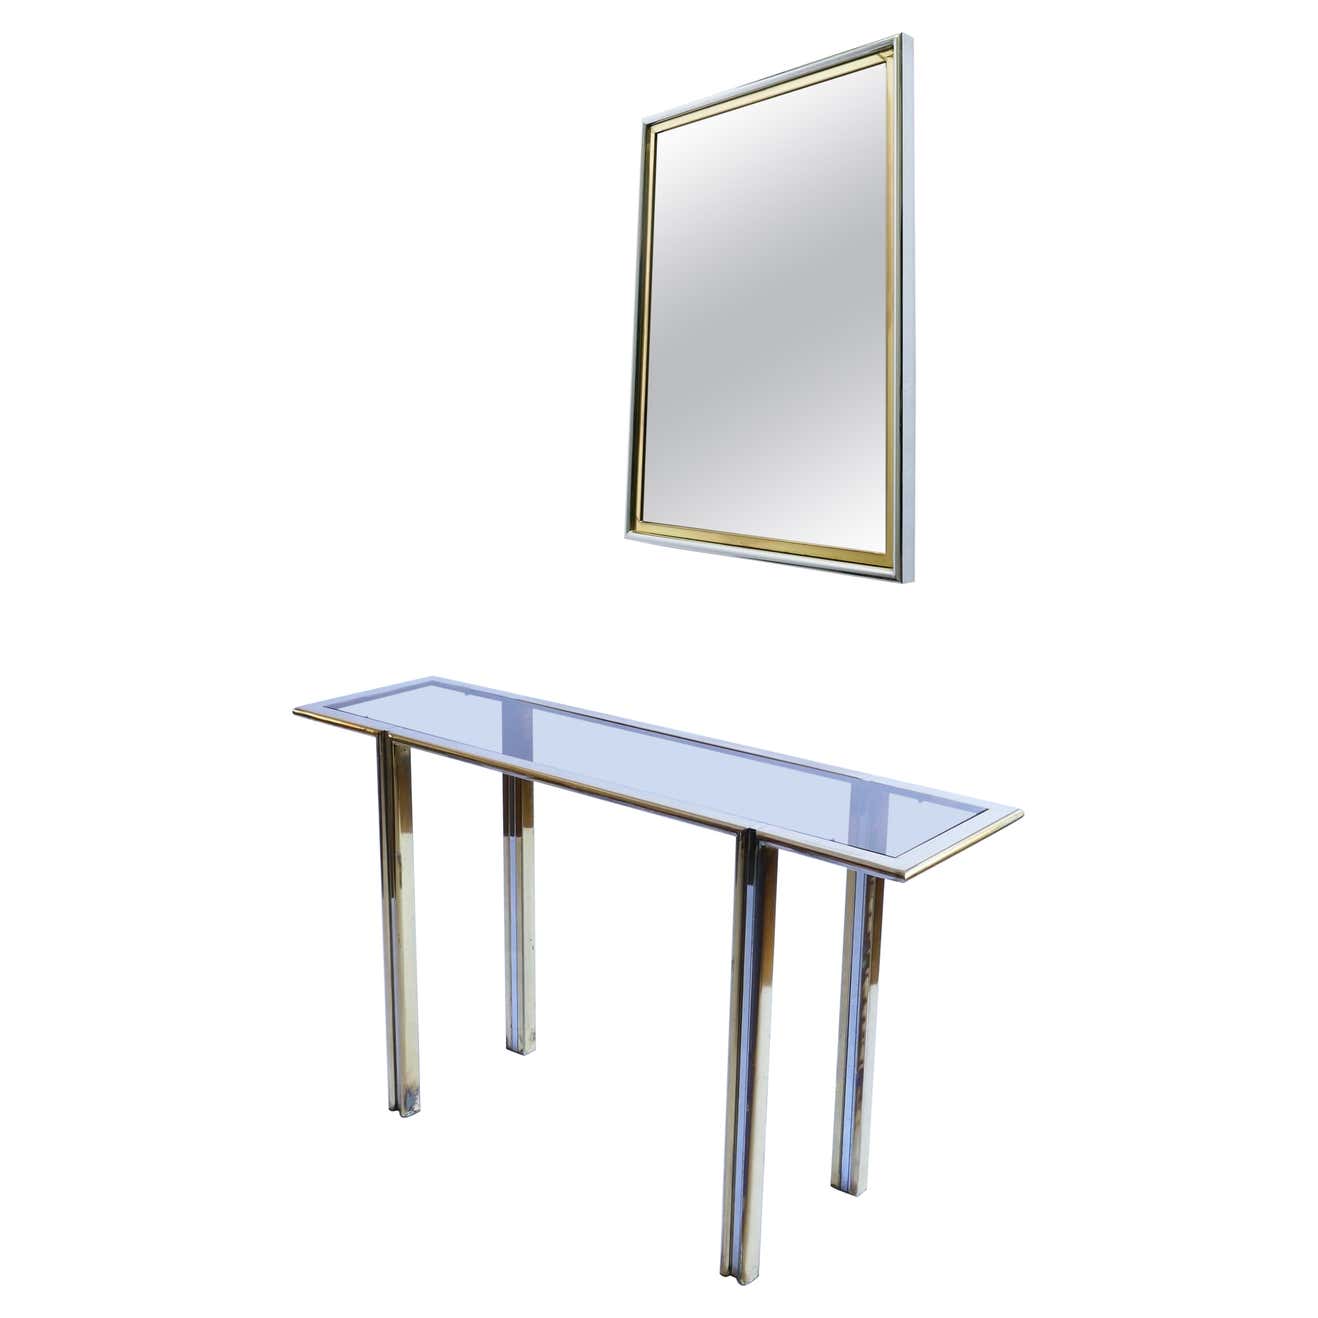 Glass, Brass and Chrome Console Table and Mirror, Italy, 1970s